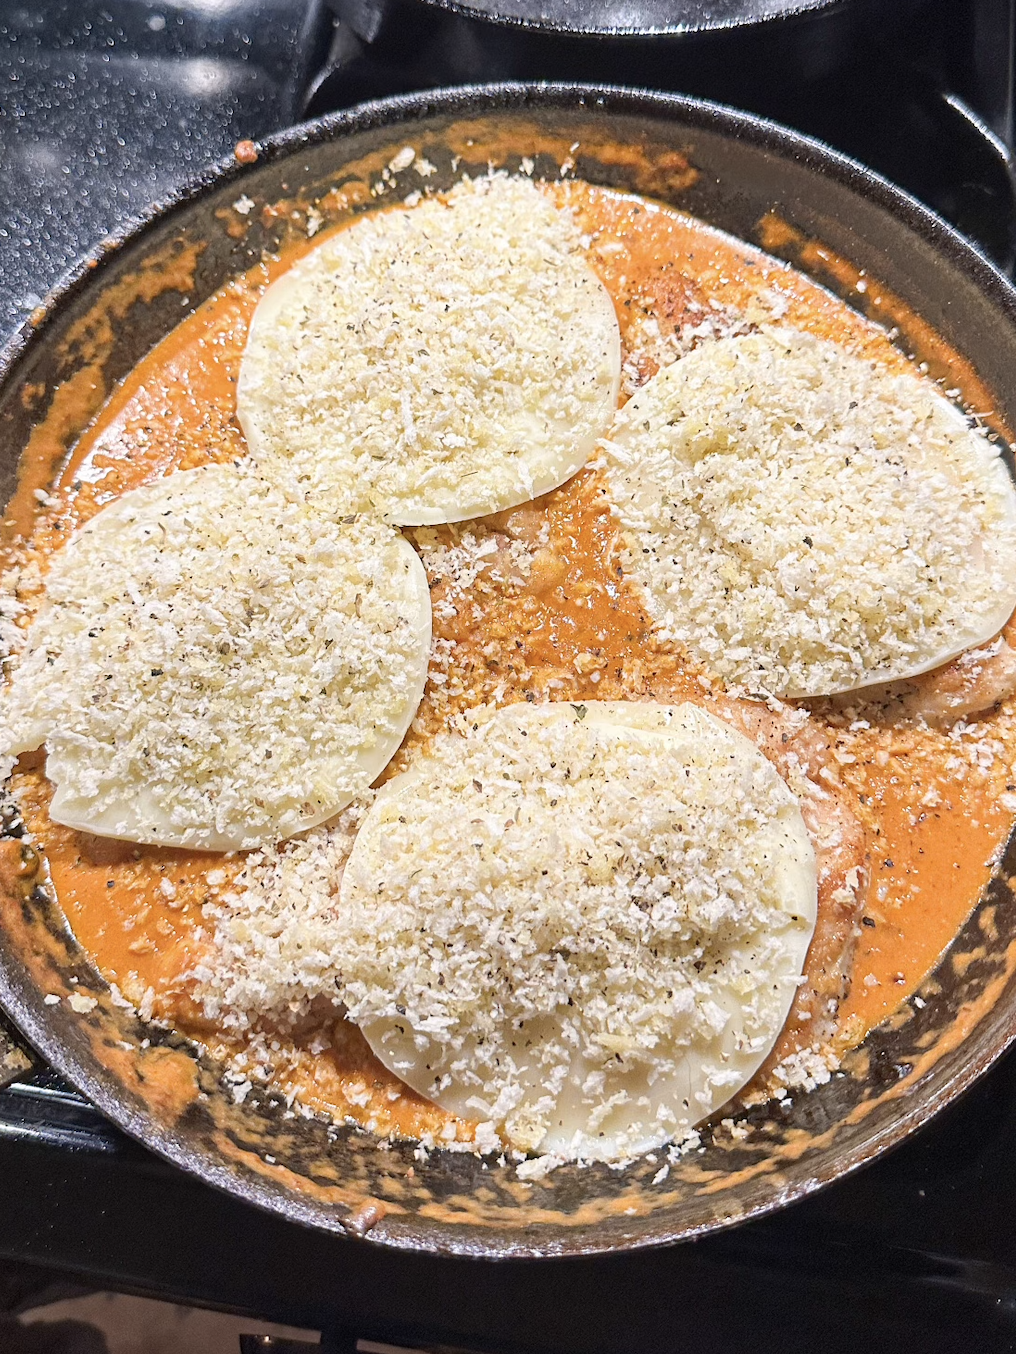 The chicken Parm with slices of cheese on top in a pan before baking